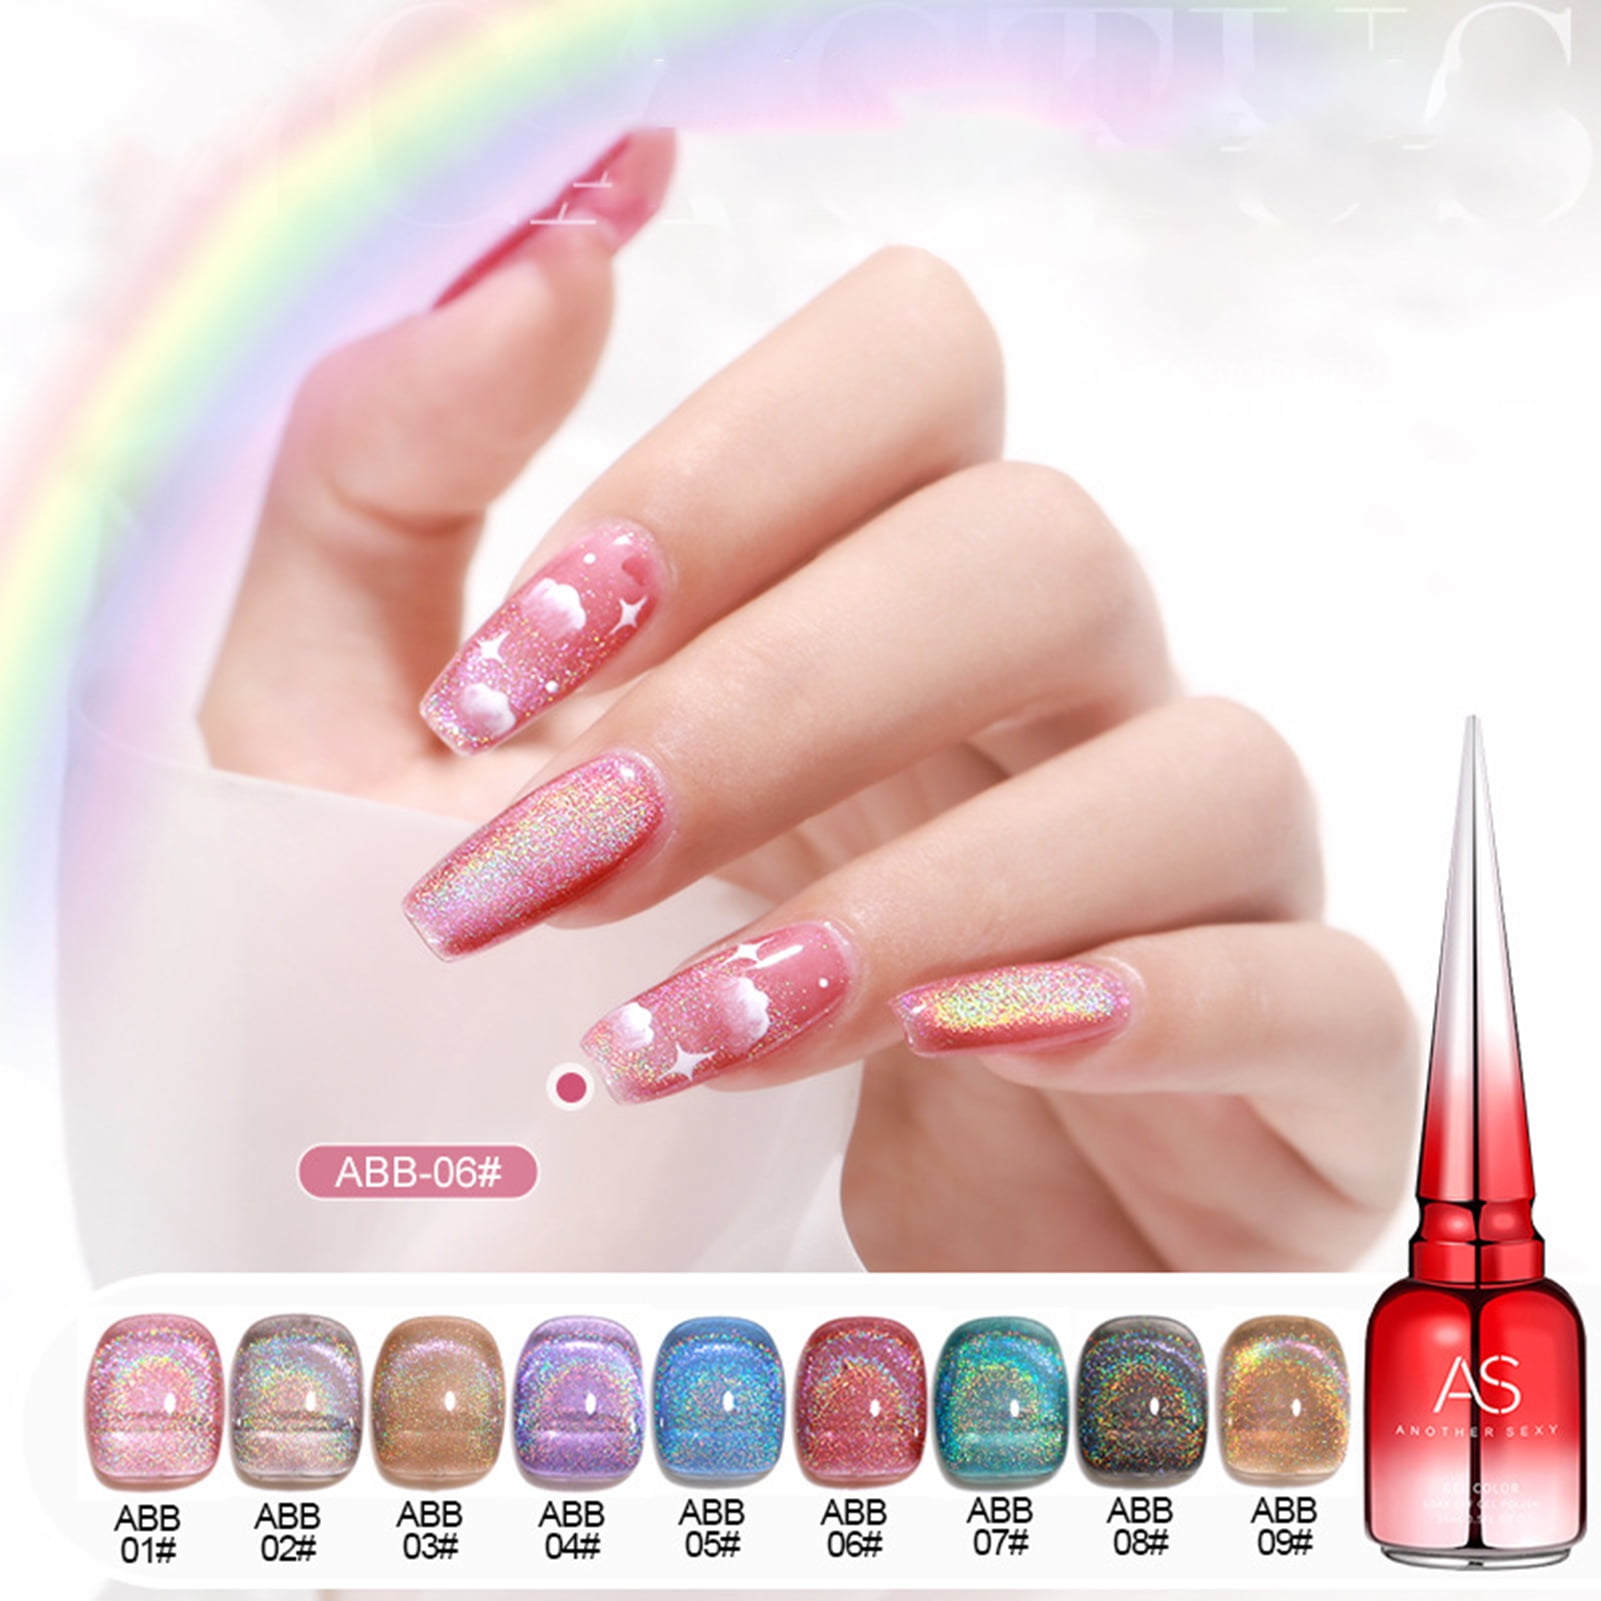 AURORA TRADE 15ml Nail Polish Excellent Saturation Quick Drying Cat Eye Effect Reflective Glitter Nail Sparkling Soak Off Gel for Salon 5925468b d090 4861 abed b76a1dce2a56.b2f5d070eb2fa21591b331362713a5fa